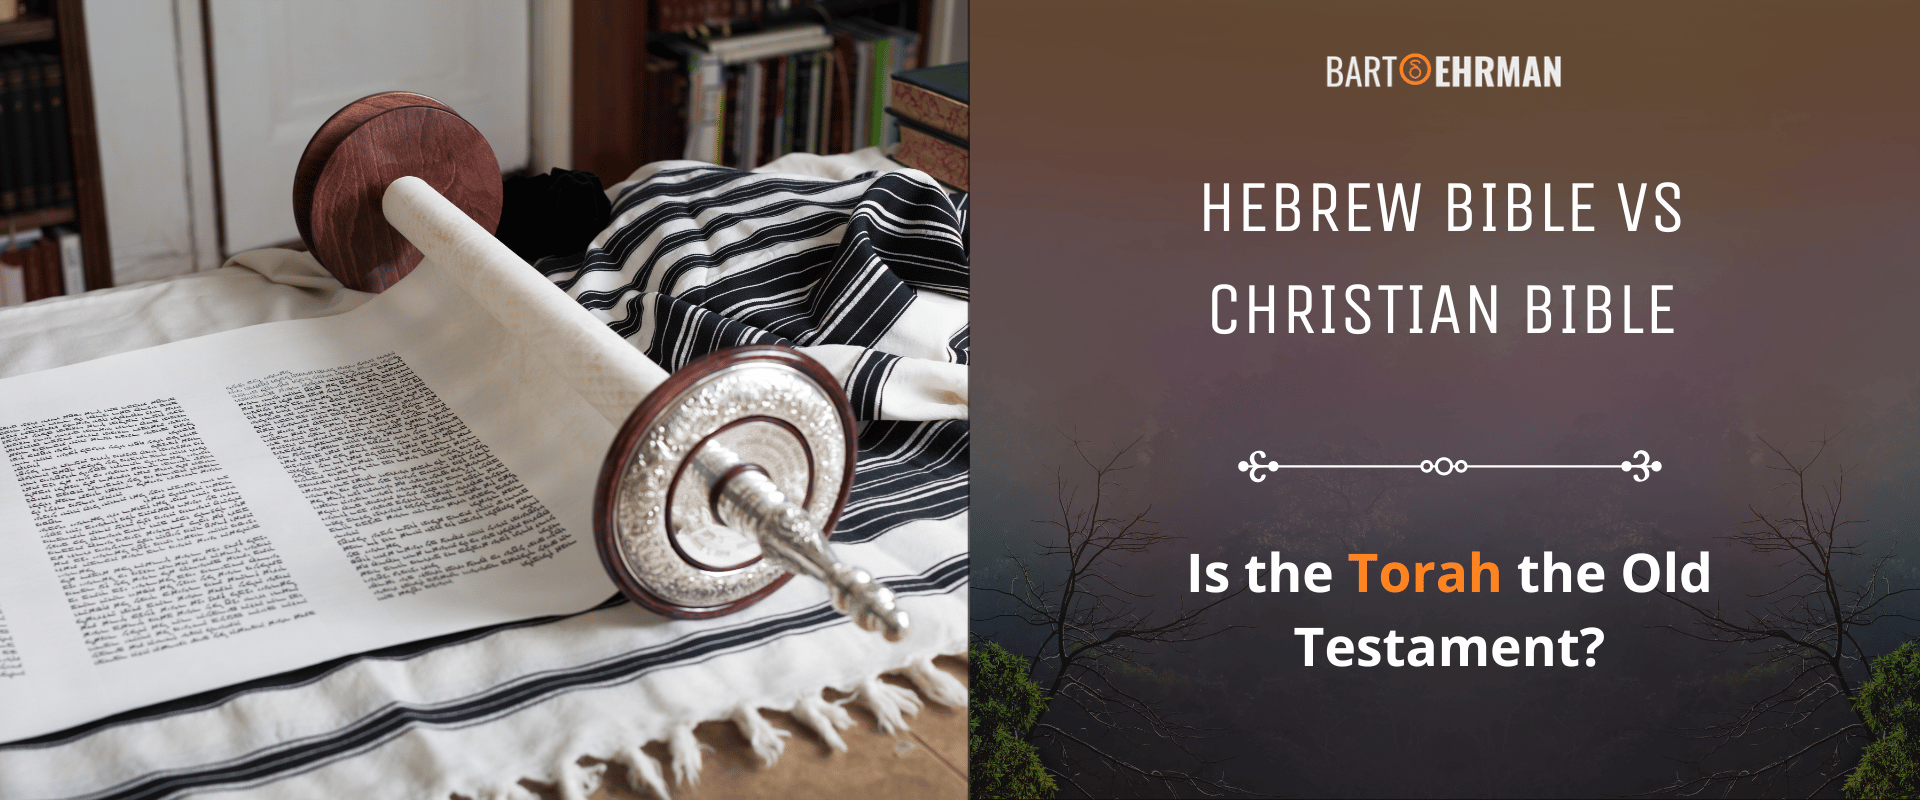 Hebrew Bible vs Christian Bible - Is the Torah the Old Testament